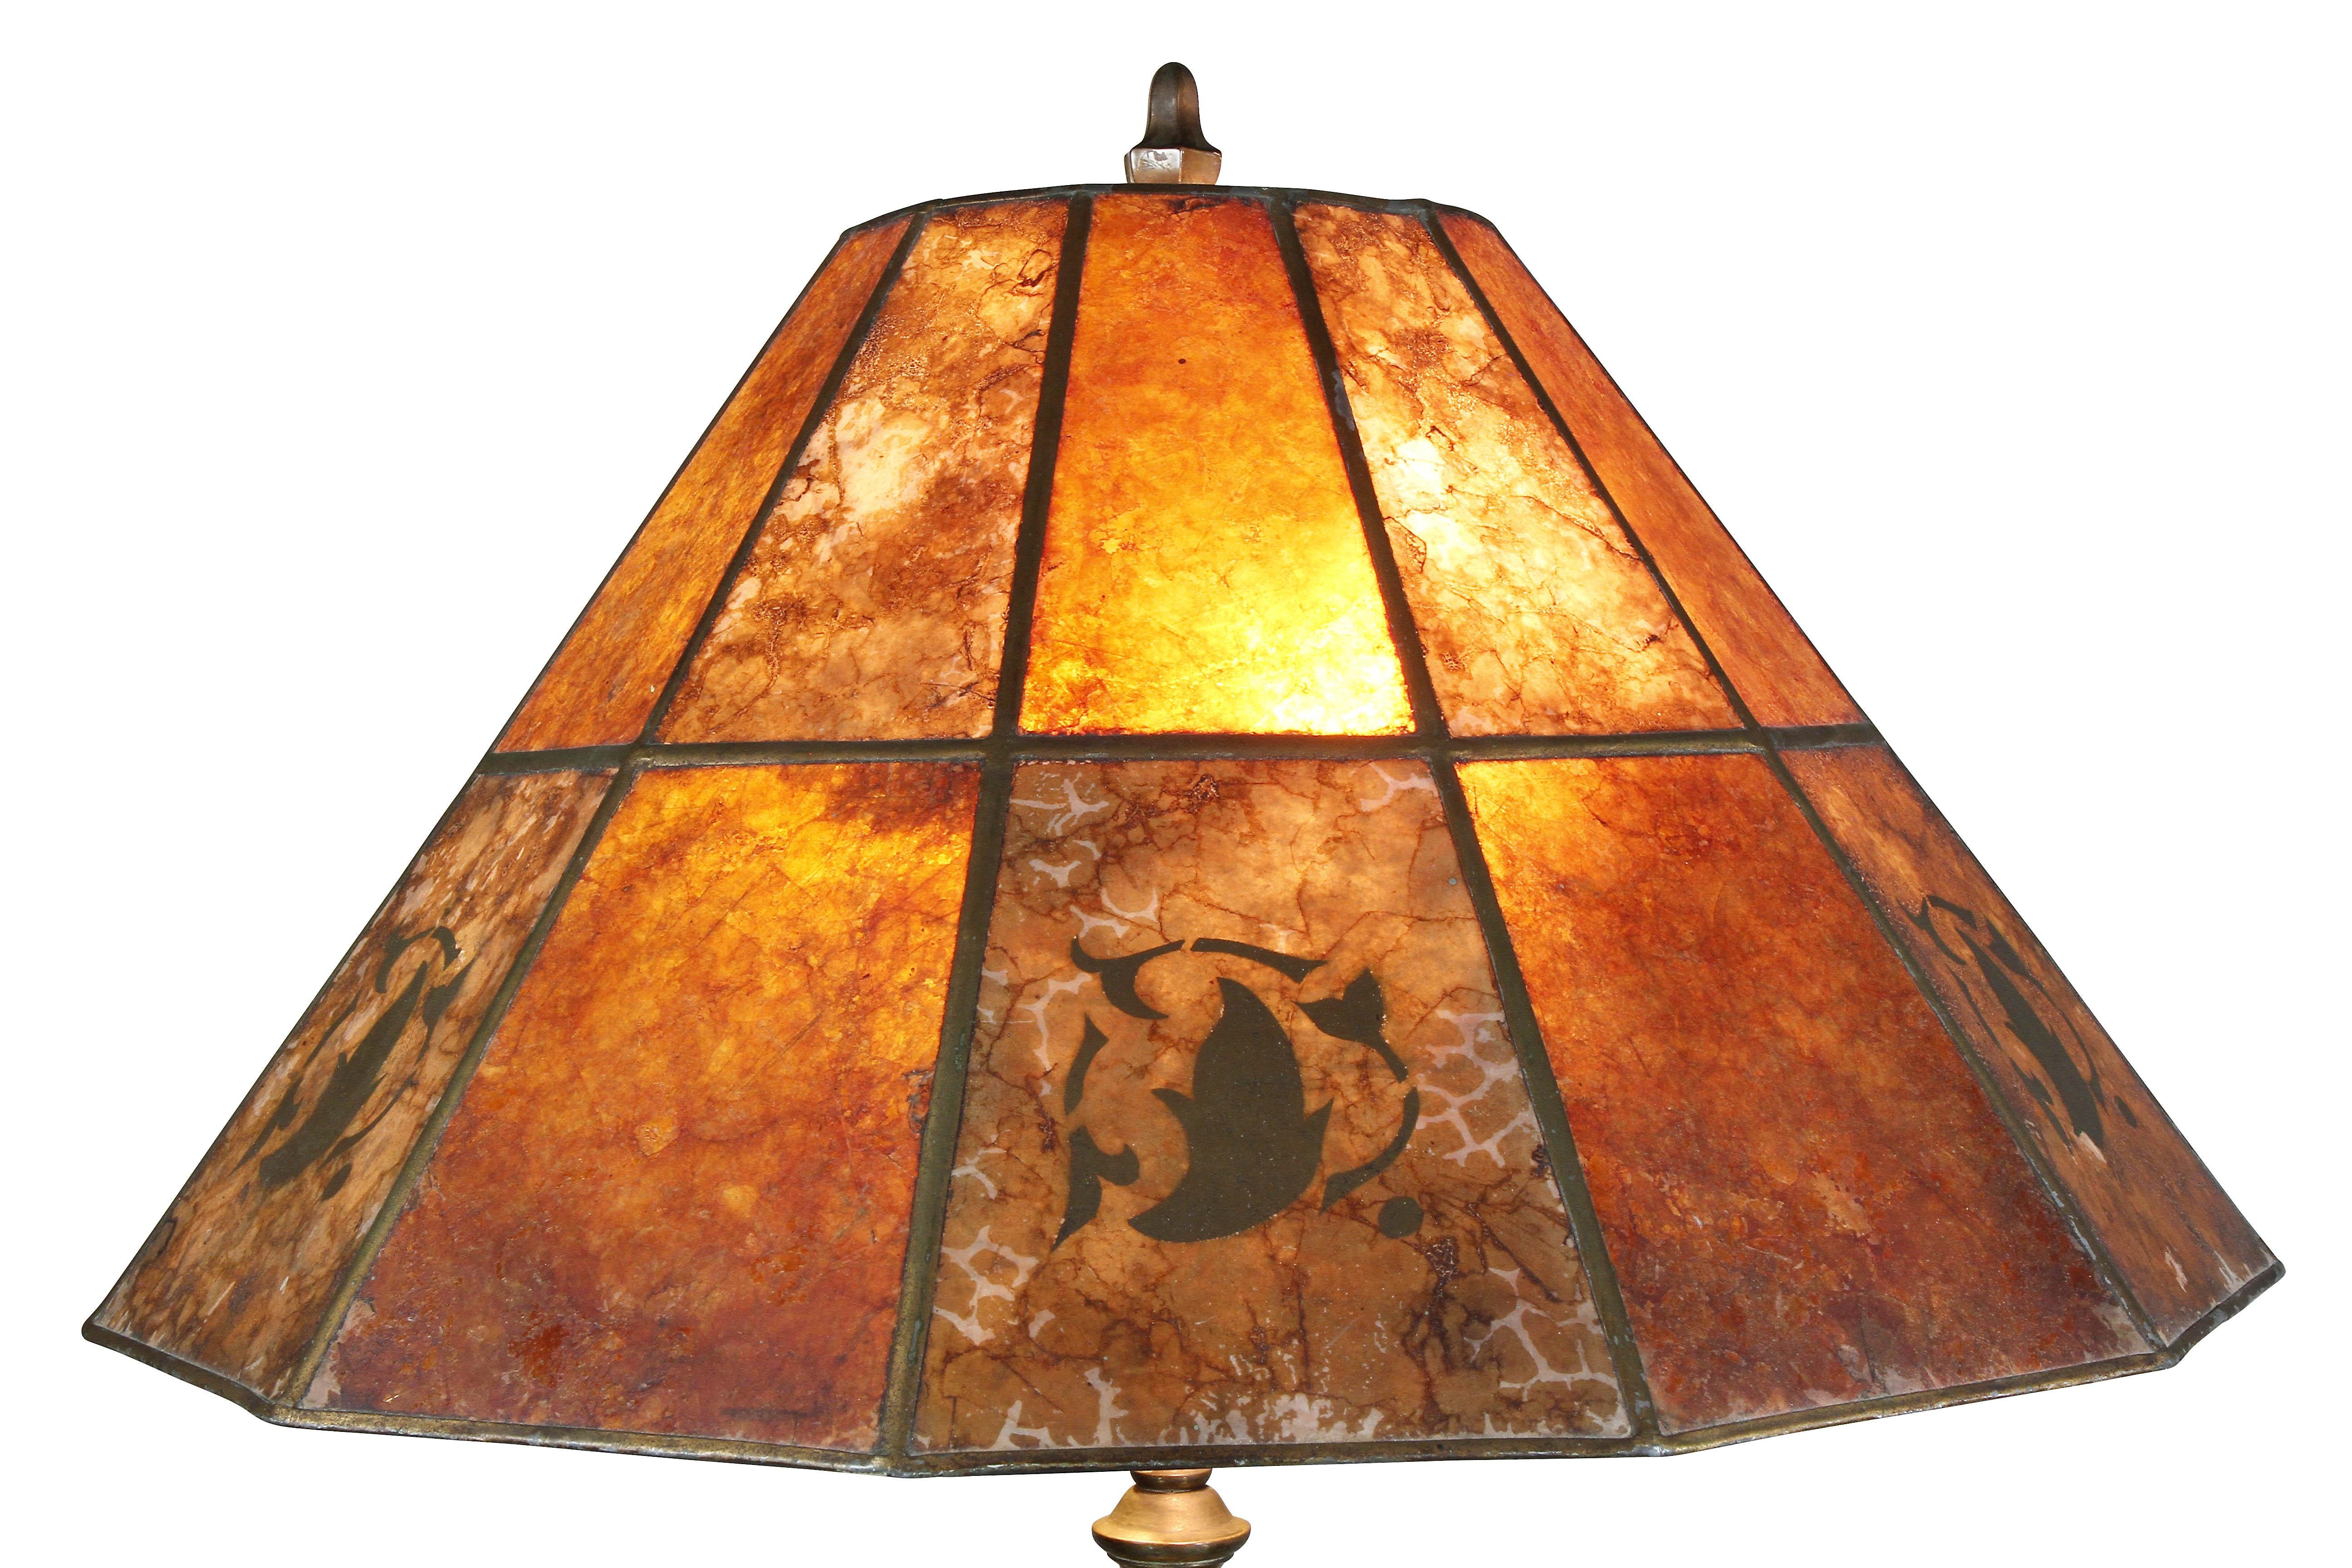 With conical shade and two-light fixture, square section support and square base with ball and claw feet.